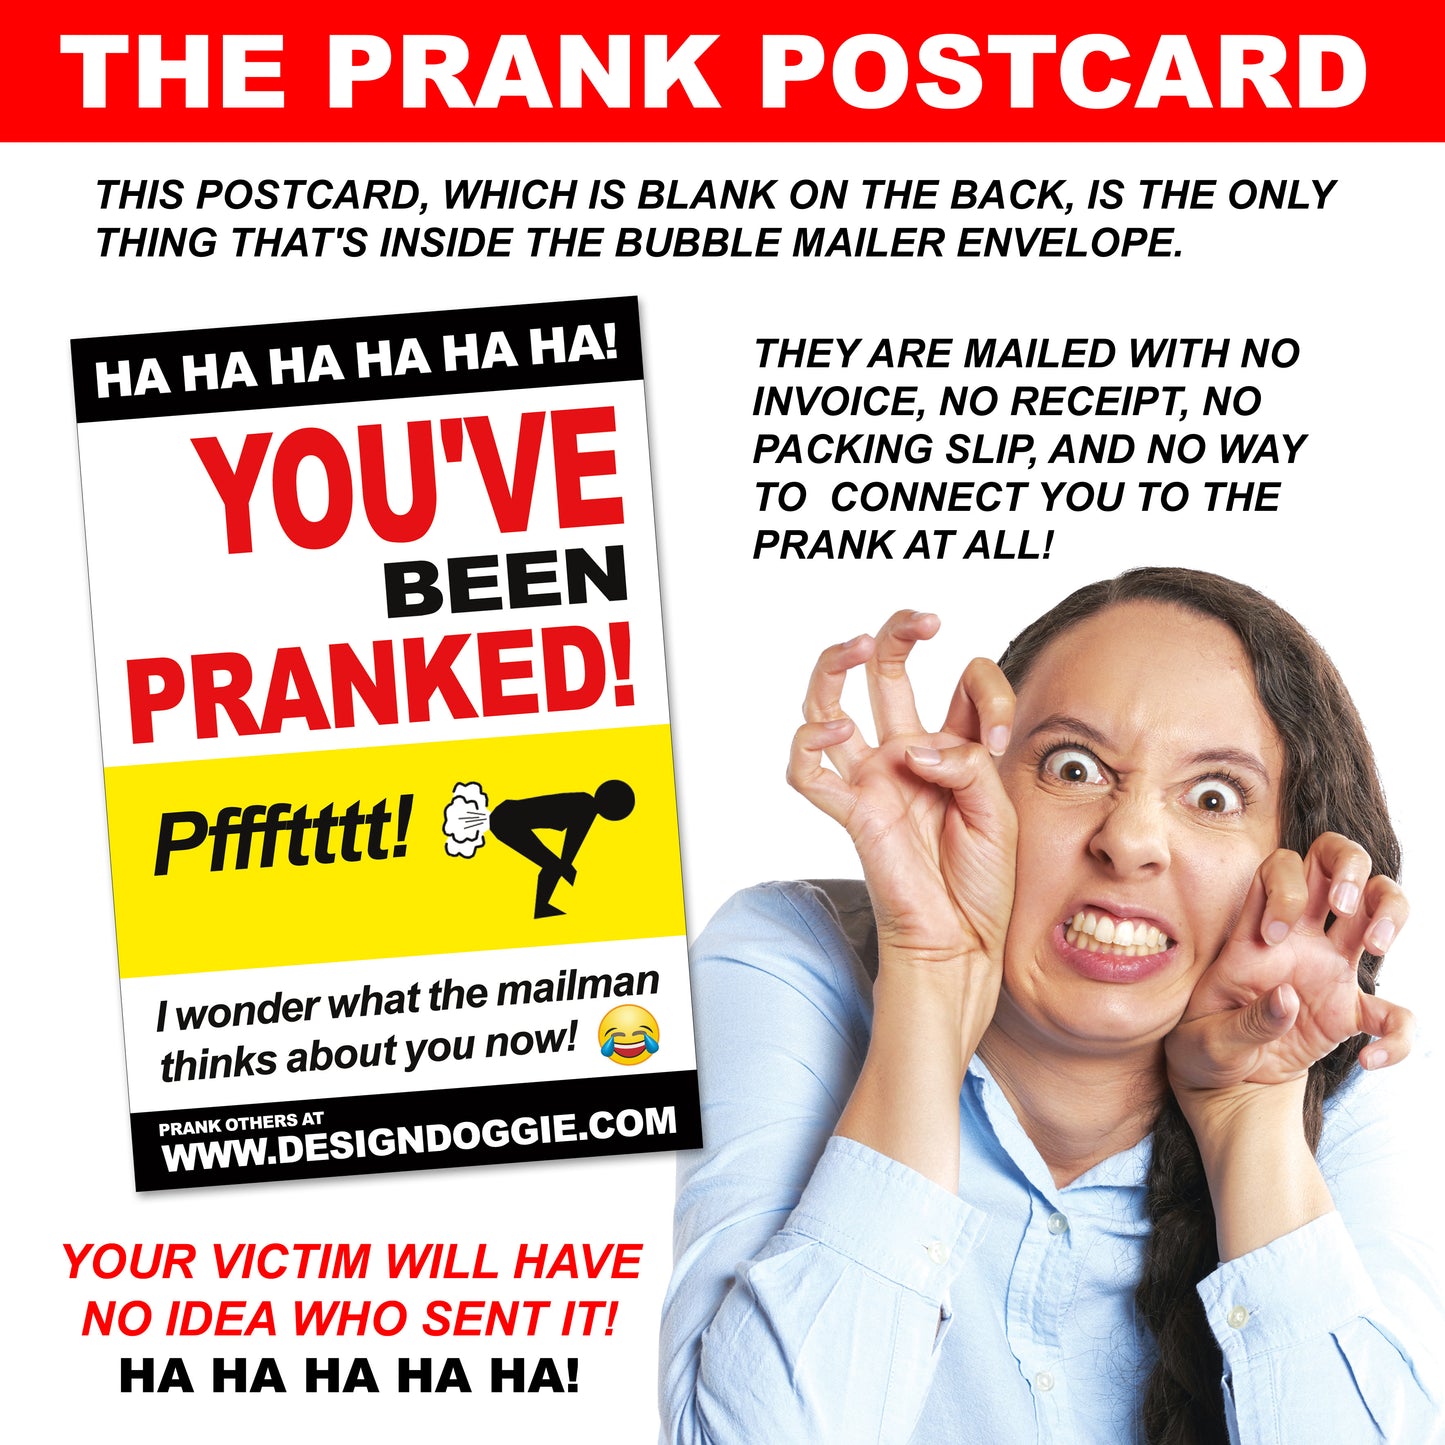 Embarrassing turd prank envelope gets mailed directly to your victims 100% anonymously!